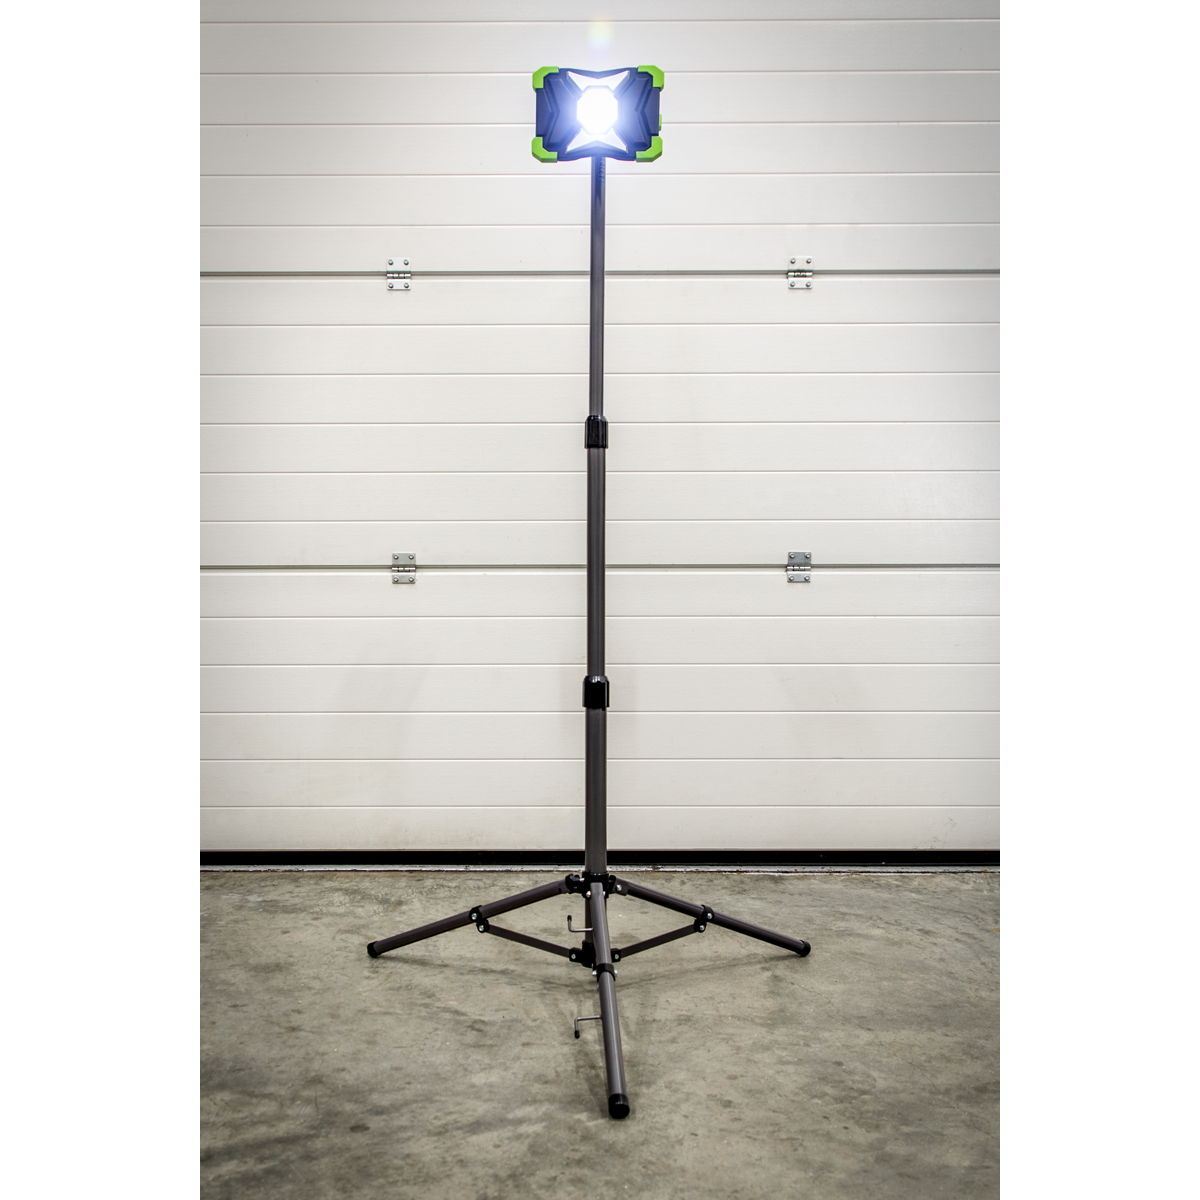 TELESCOPIC TRIPOD - Which extends to a maximum height of 1.5m and minimum height of 0.66m.